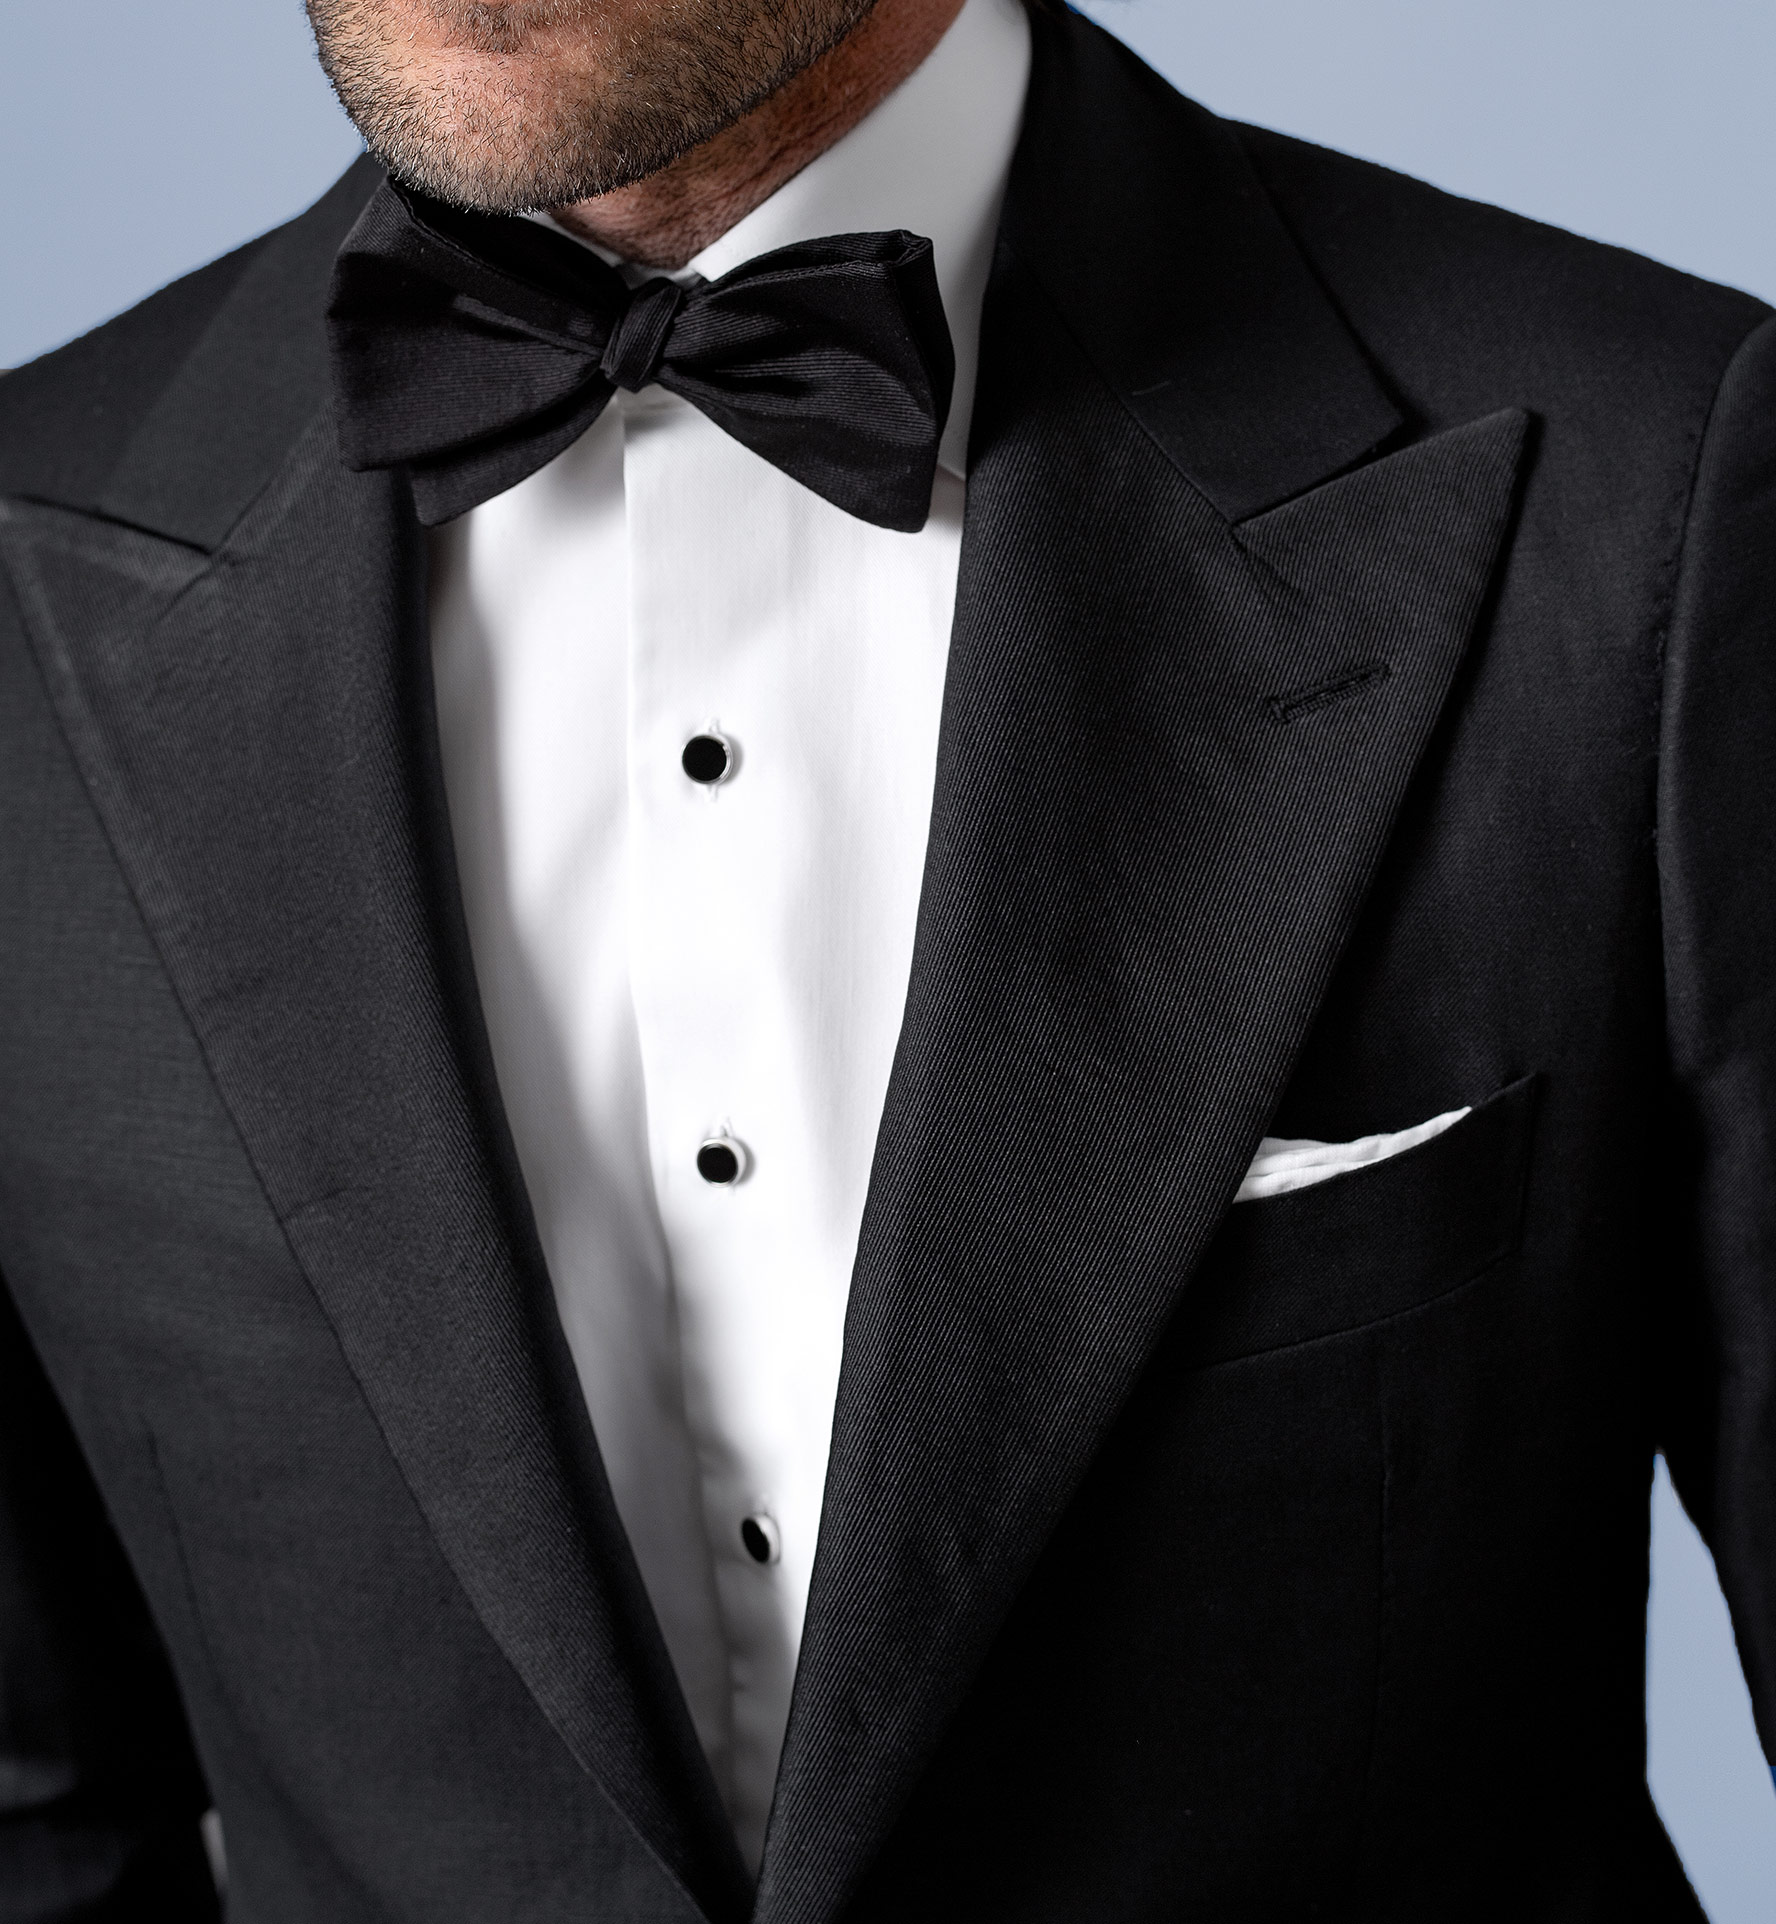 Mayfair Black Wool and Linen Tuxedo - Custom Fit Tailored Clothing